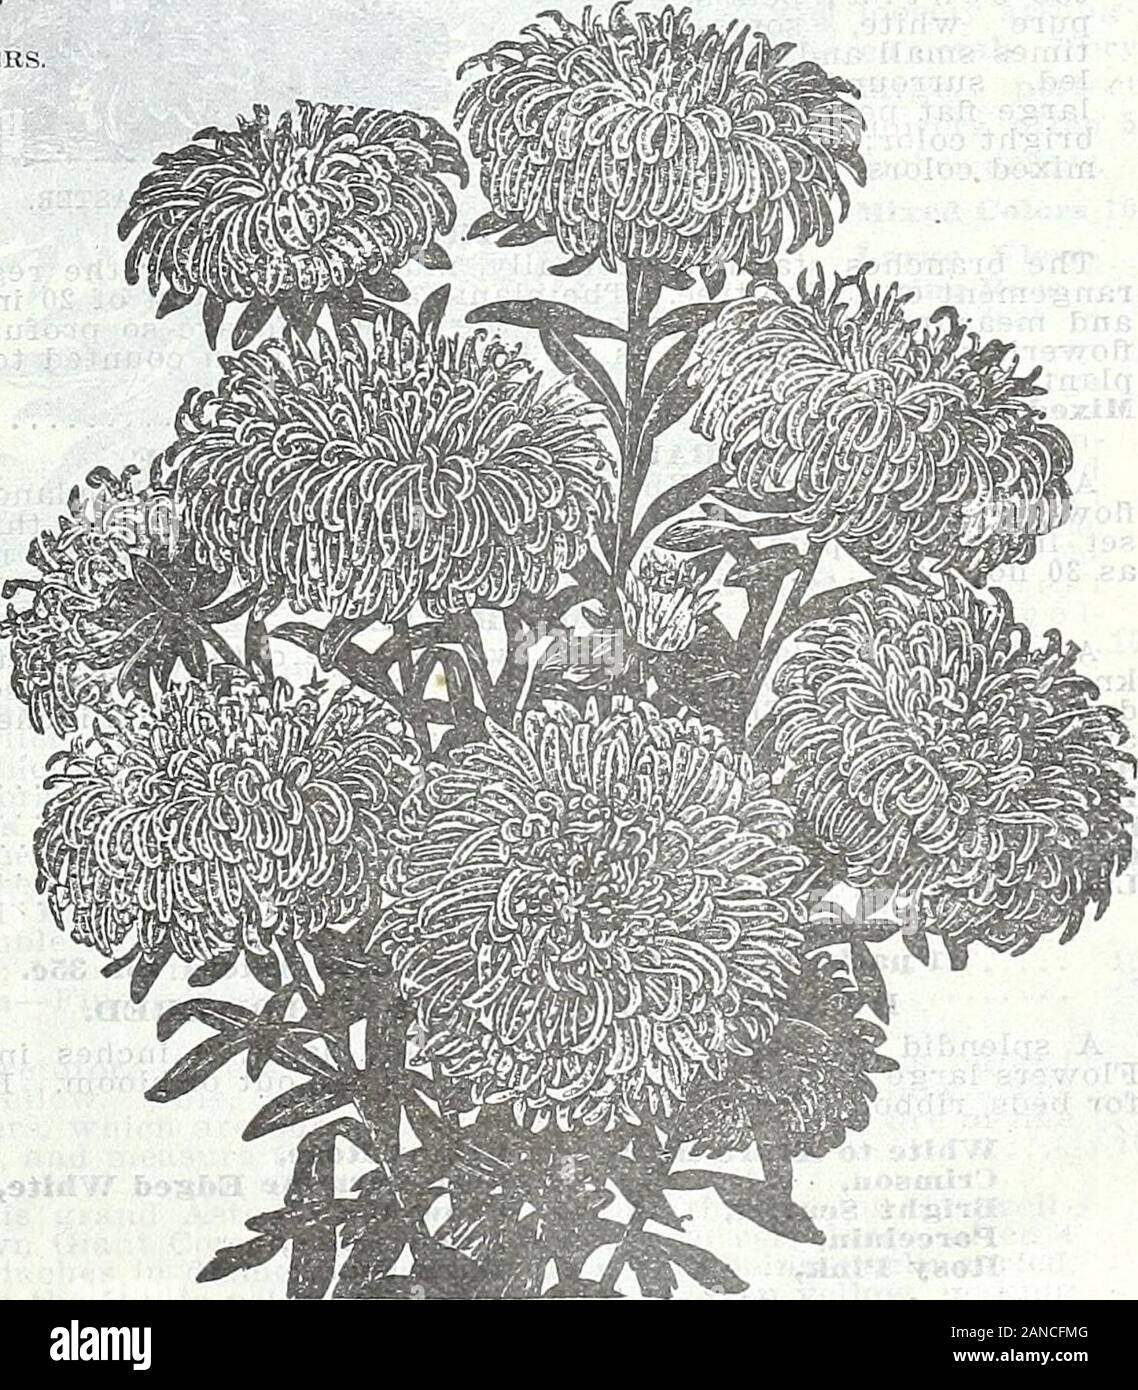 Farm and garden annual, spring 1906 . ngpieces. Pkt. White 10 Blue 10 Lavender 10 1 pkt. each of the 5 named Semples Branching Asters for 35c. GIANT UPRIGHT BRANCHING. A grand Aster, growing about 30 inches tall, with strong,straight, upright stems, permitting of close planting. The flowersare exceptionally large and very double. Pkt. Pure White 10 Pink 10 DWARF OR BUSH ASTERS. A new class forming small compact bushesabout 9 inches in height, branching very freelyand densely furnished with foliage. When infull bloom the plant is completely covered withcharming little double flowers, about an i Stock Photo